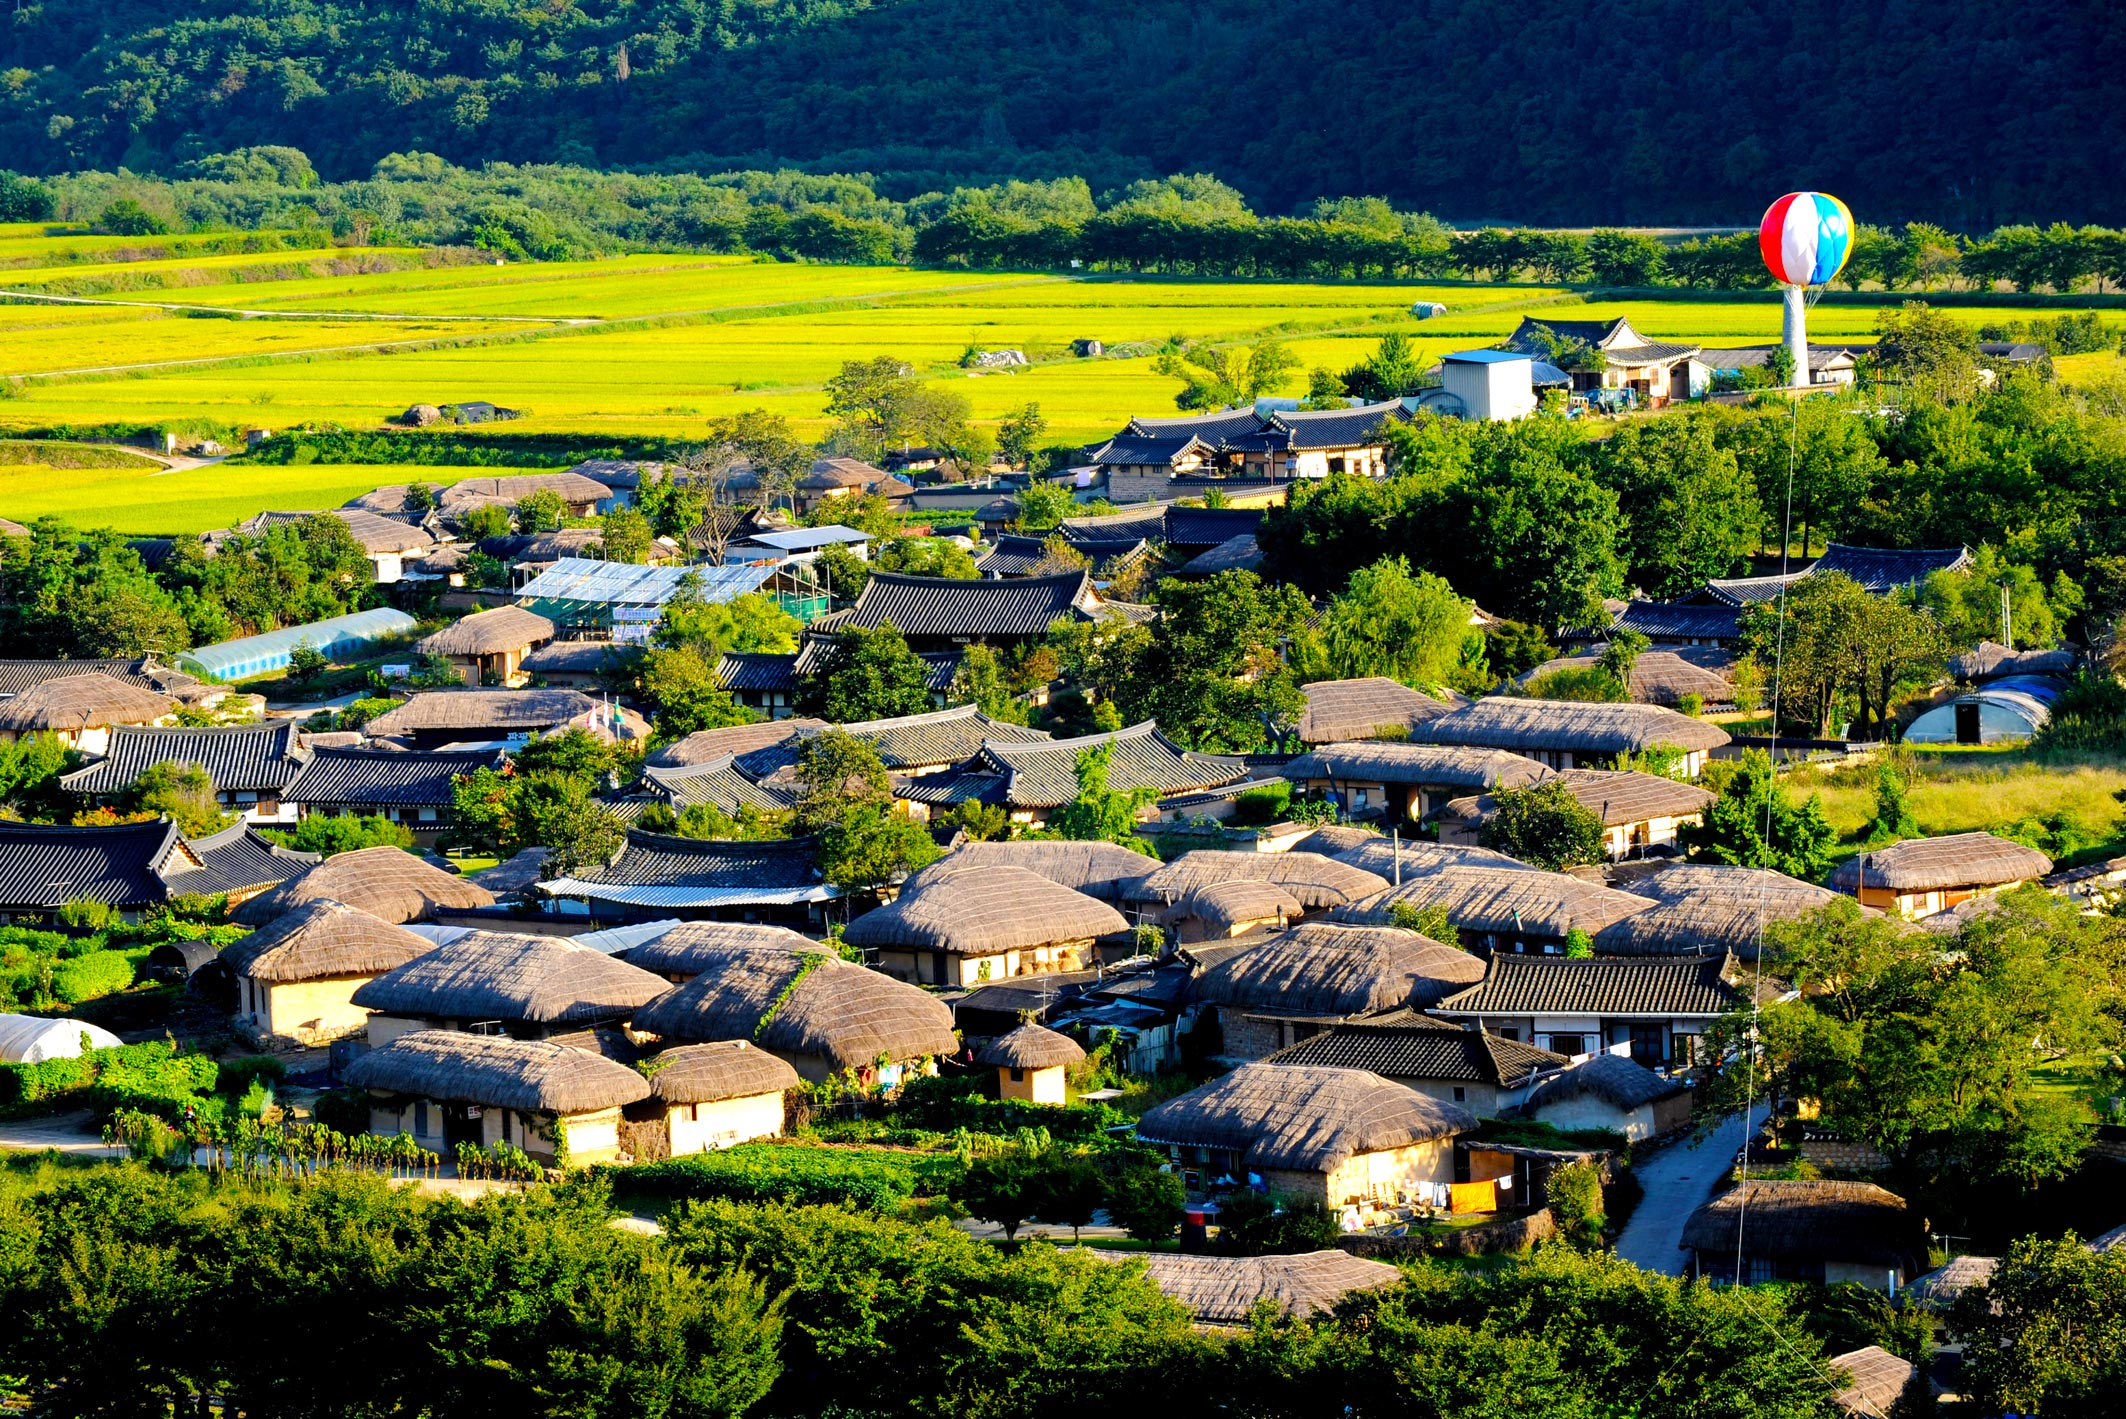 Hohoe+village+in+Andong_rid.jpg